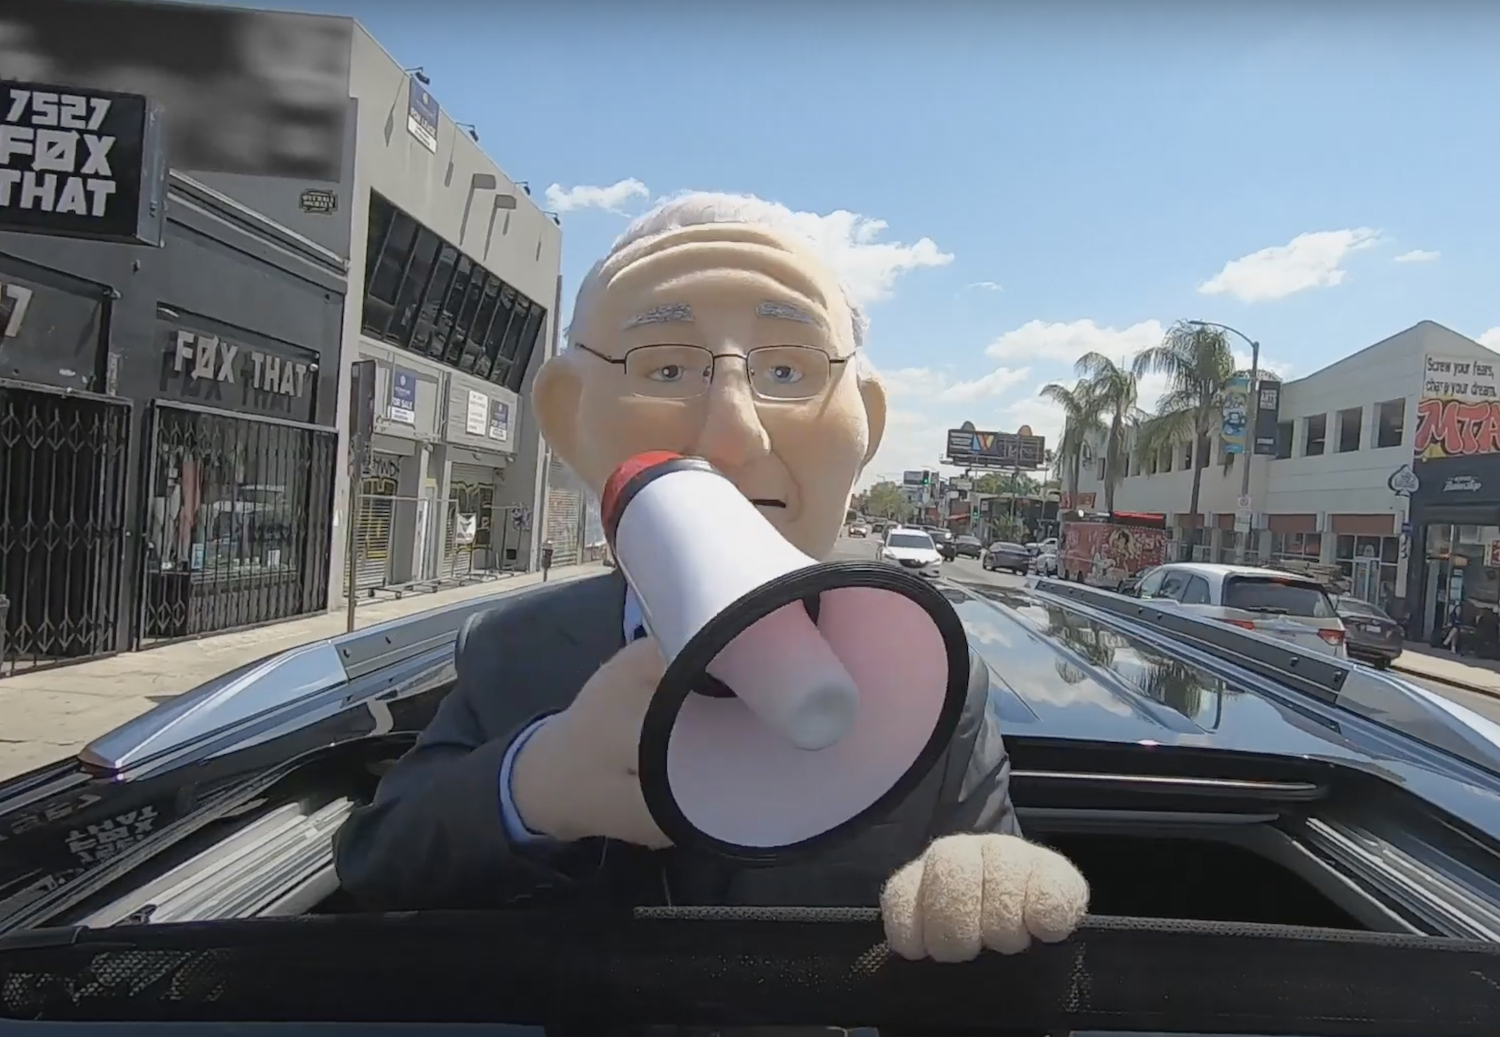 Dr. Anthony Fauci Puppet Let's Be Real